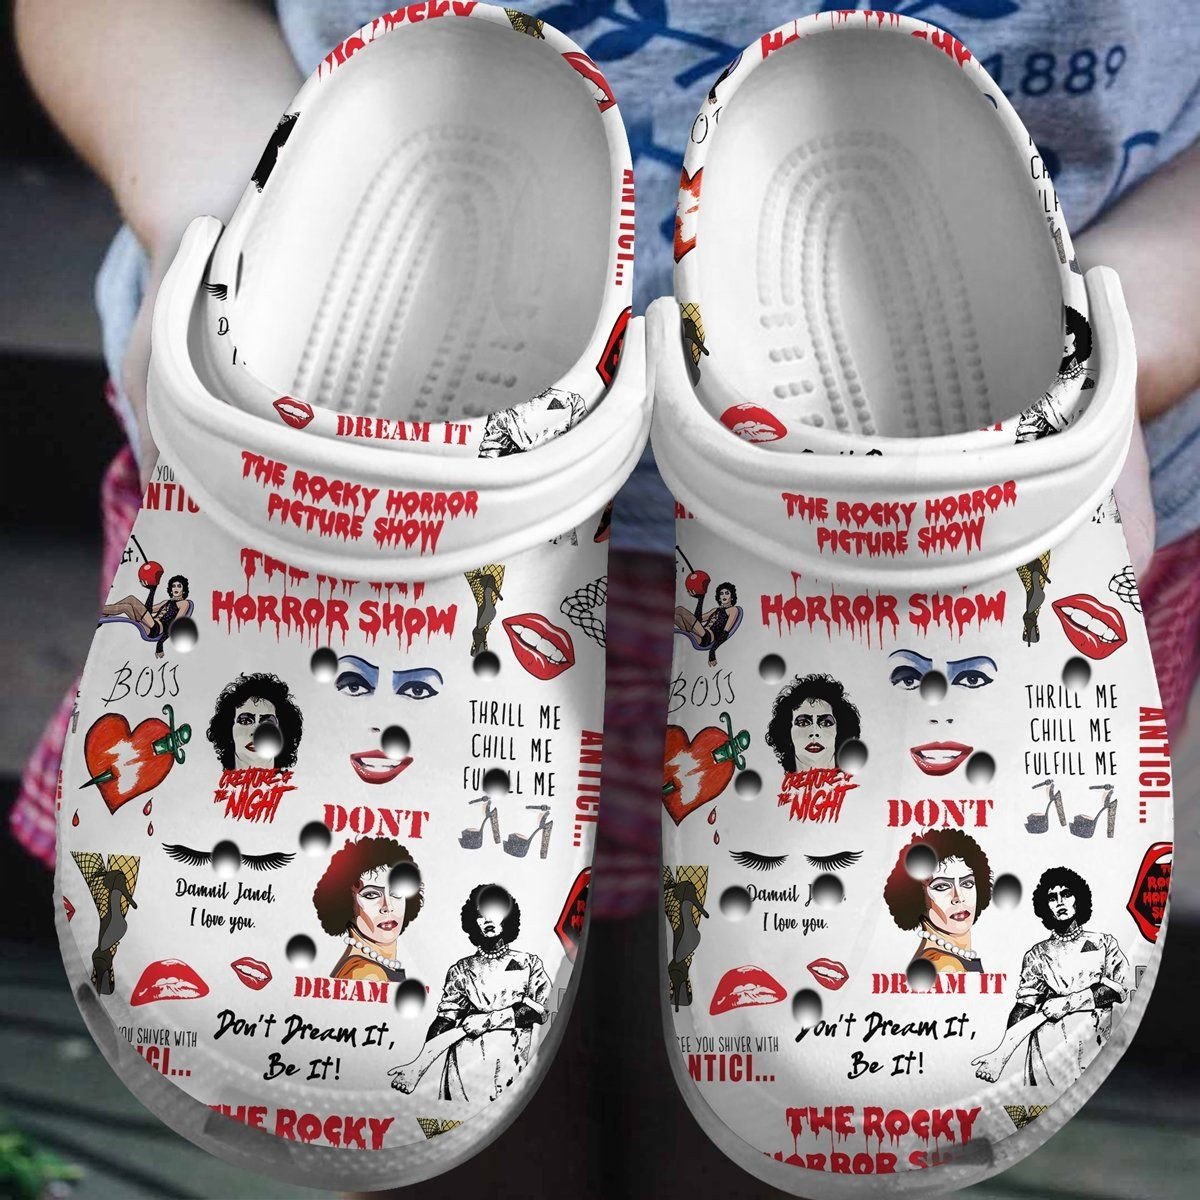 The Rocky Horror Picture Show Crocs Classic Clog Shoes PANCR1195